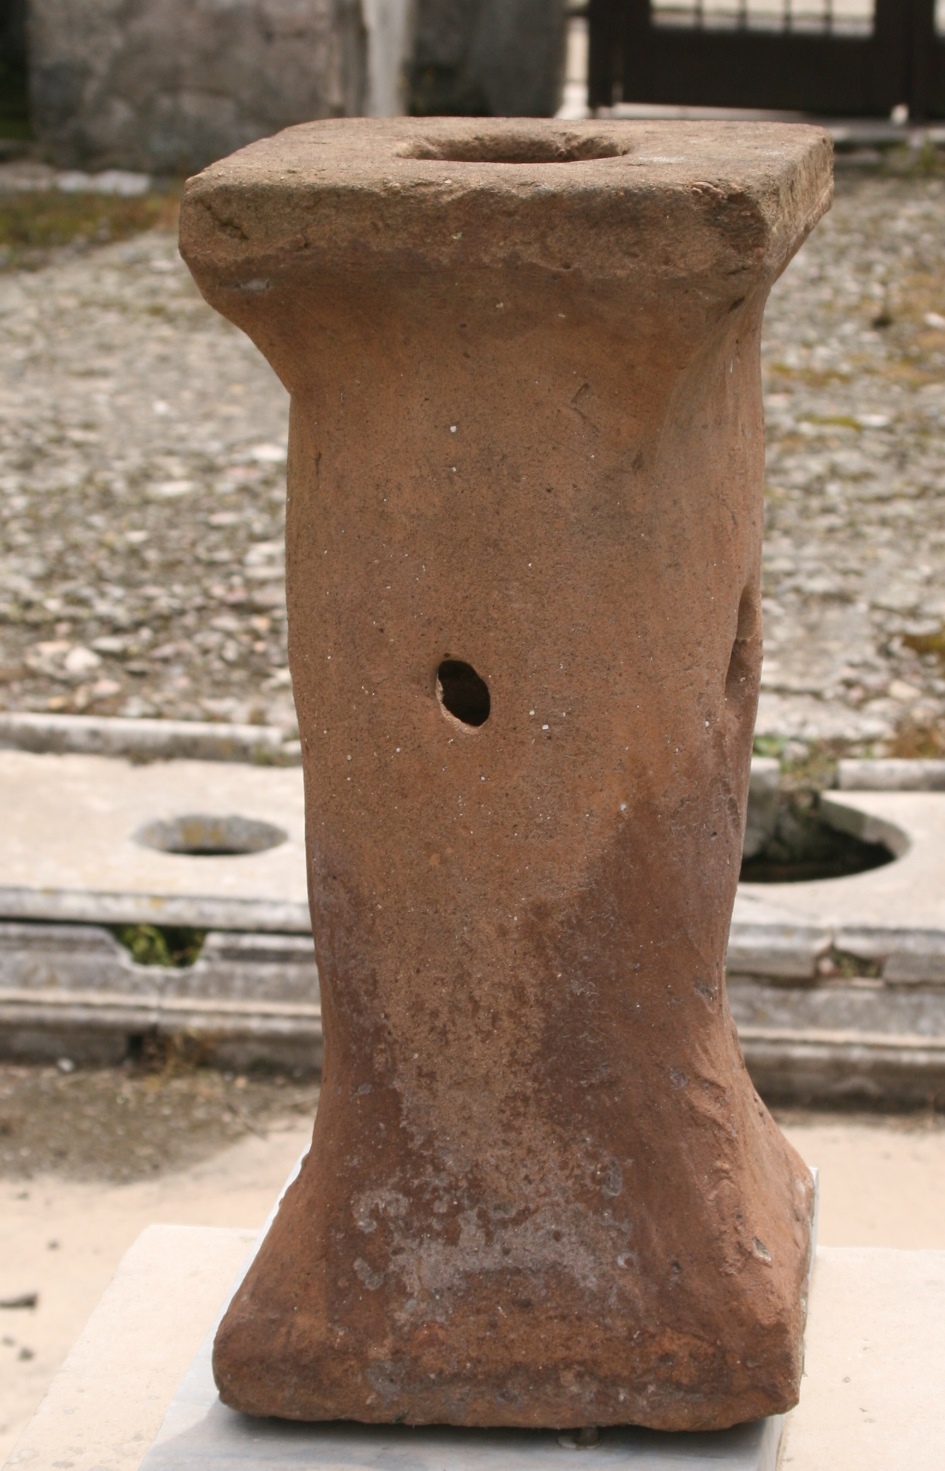 Floor, detail showing one of the pillars for the hypocaust not in situ. Photo: Thomas Staub